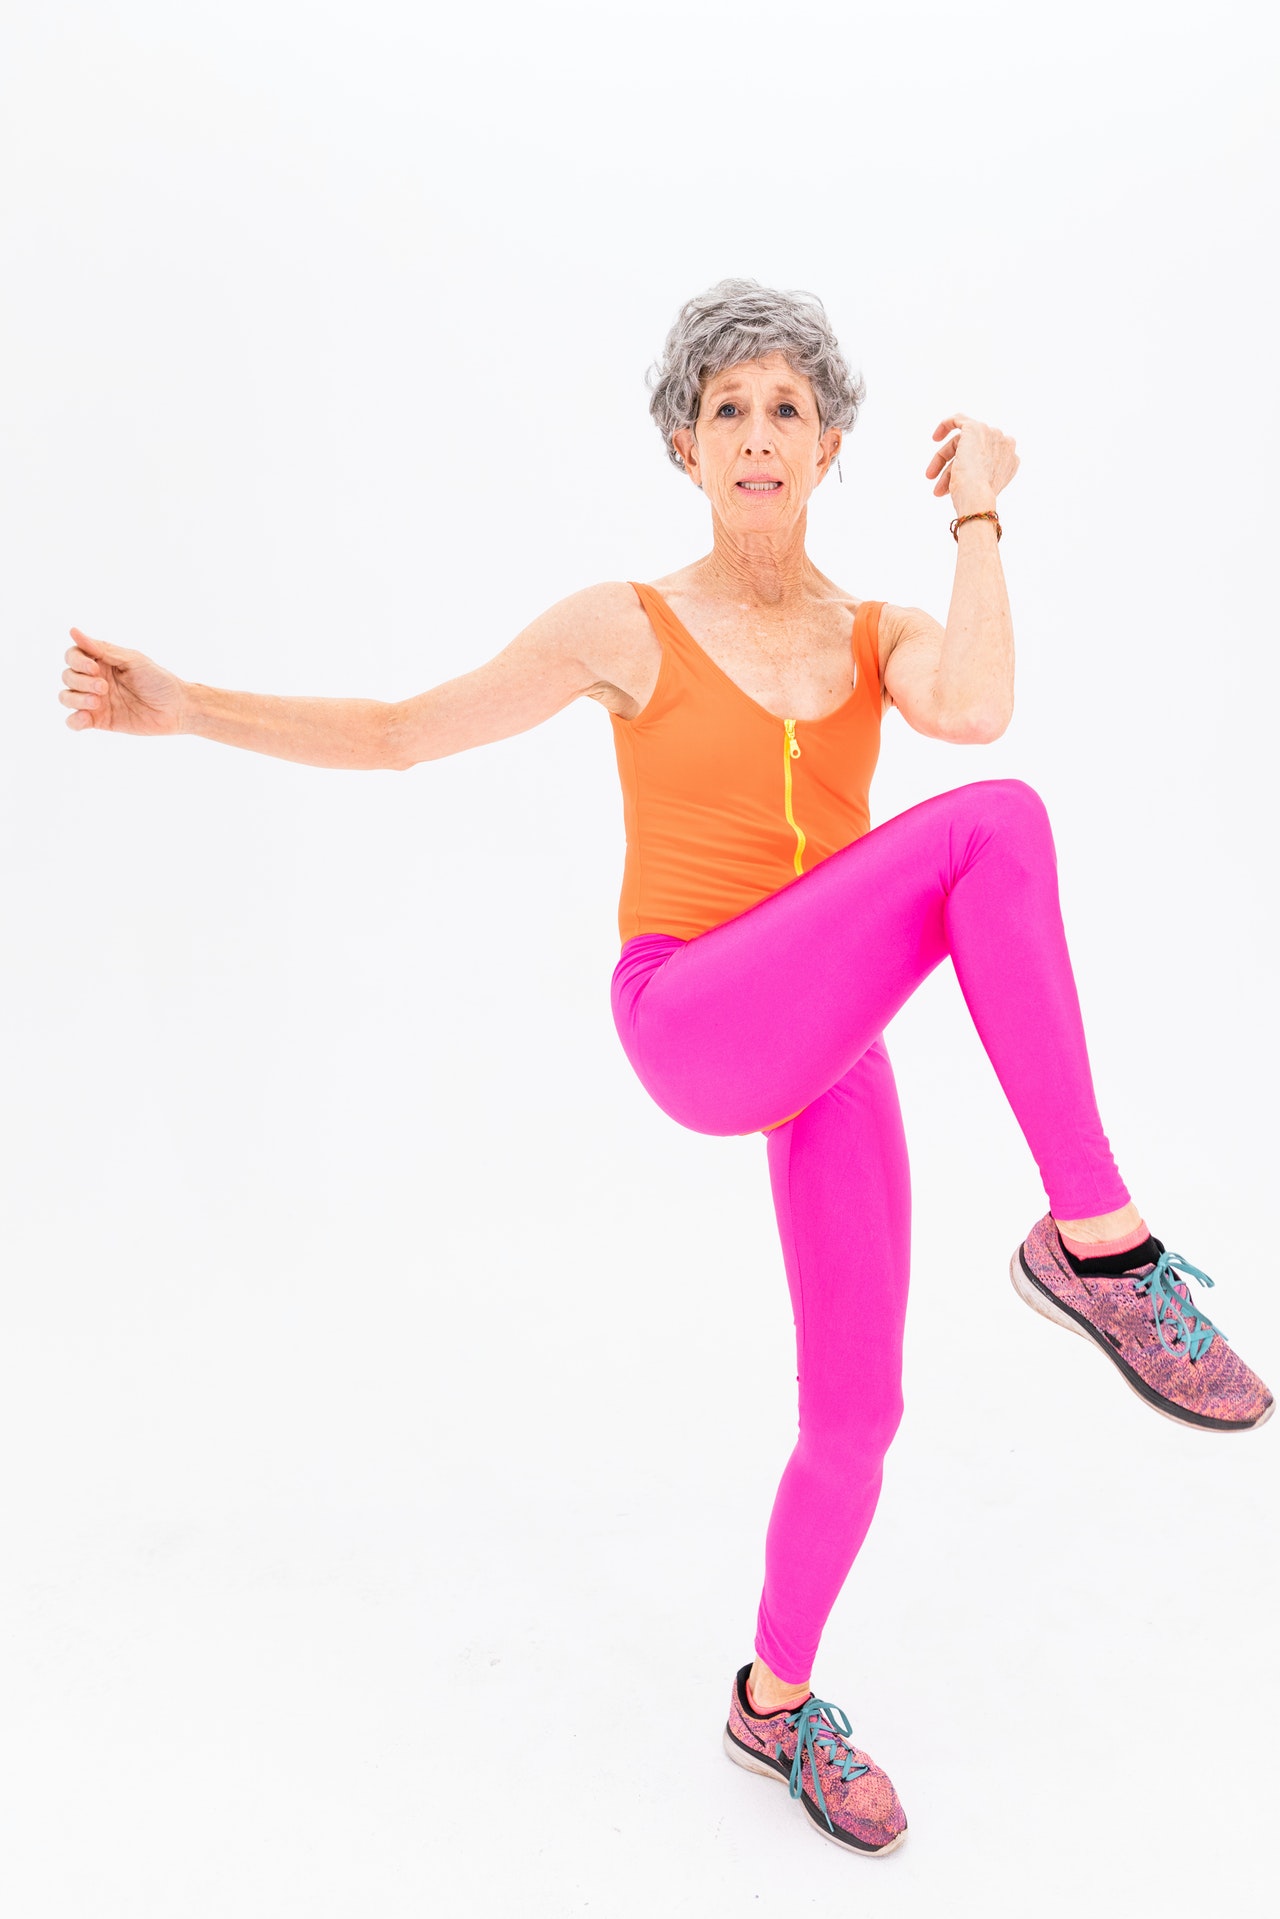 a woman in pink leggings and orange top doing a dance